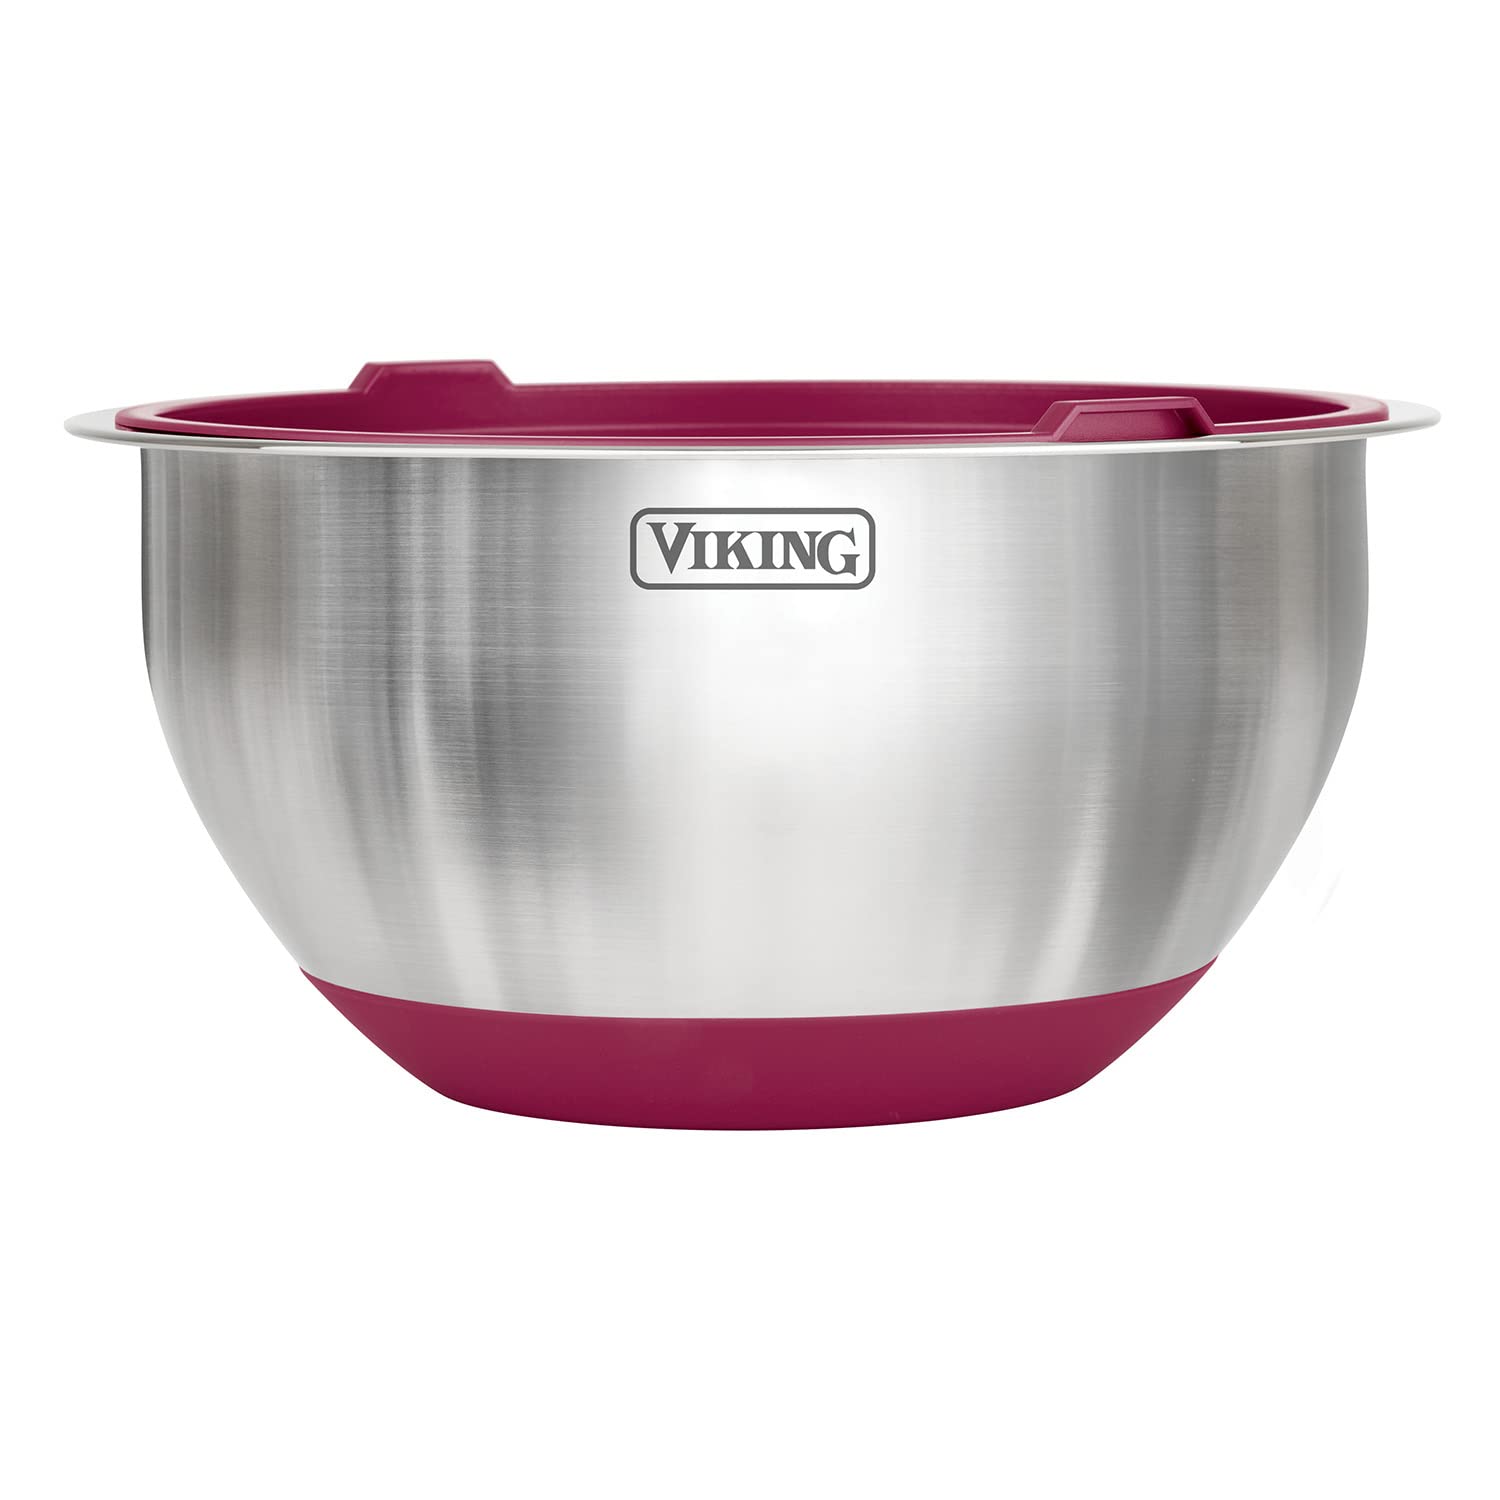 Viking Culinary 10-Piece Stainless Steel Bowl Set, Red (40015-9990RPLT1)